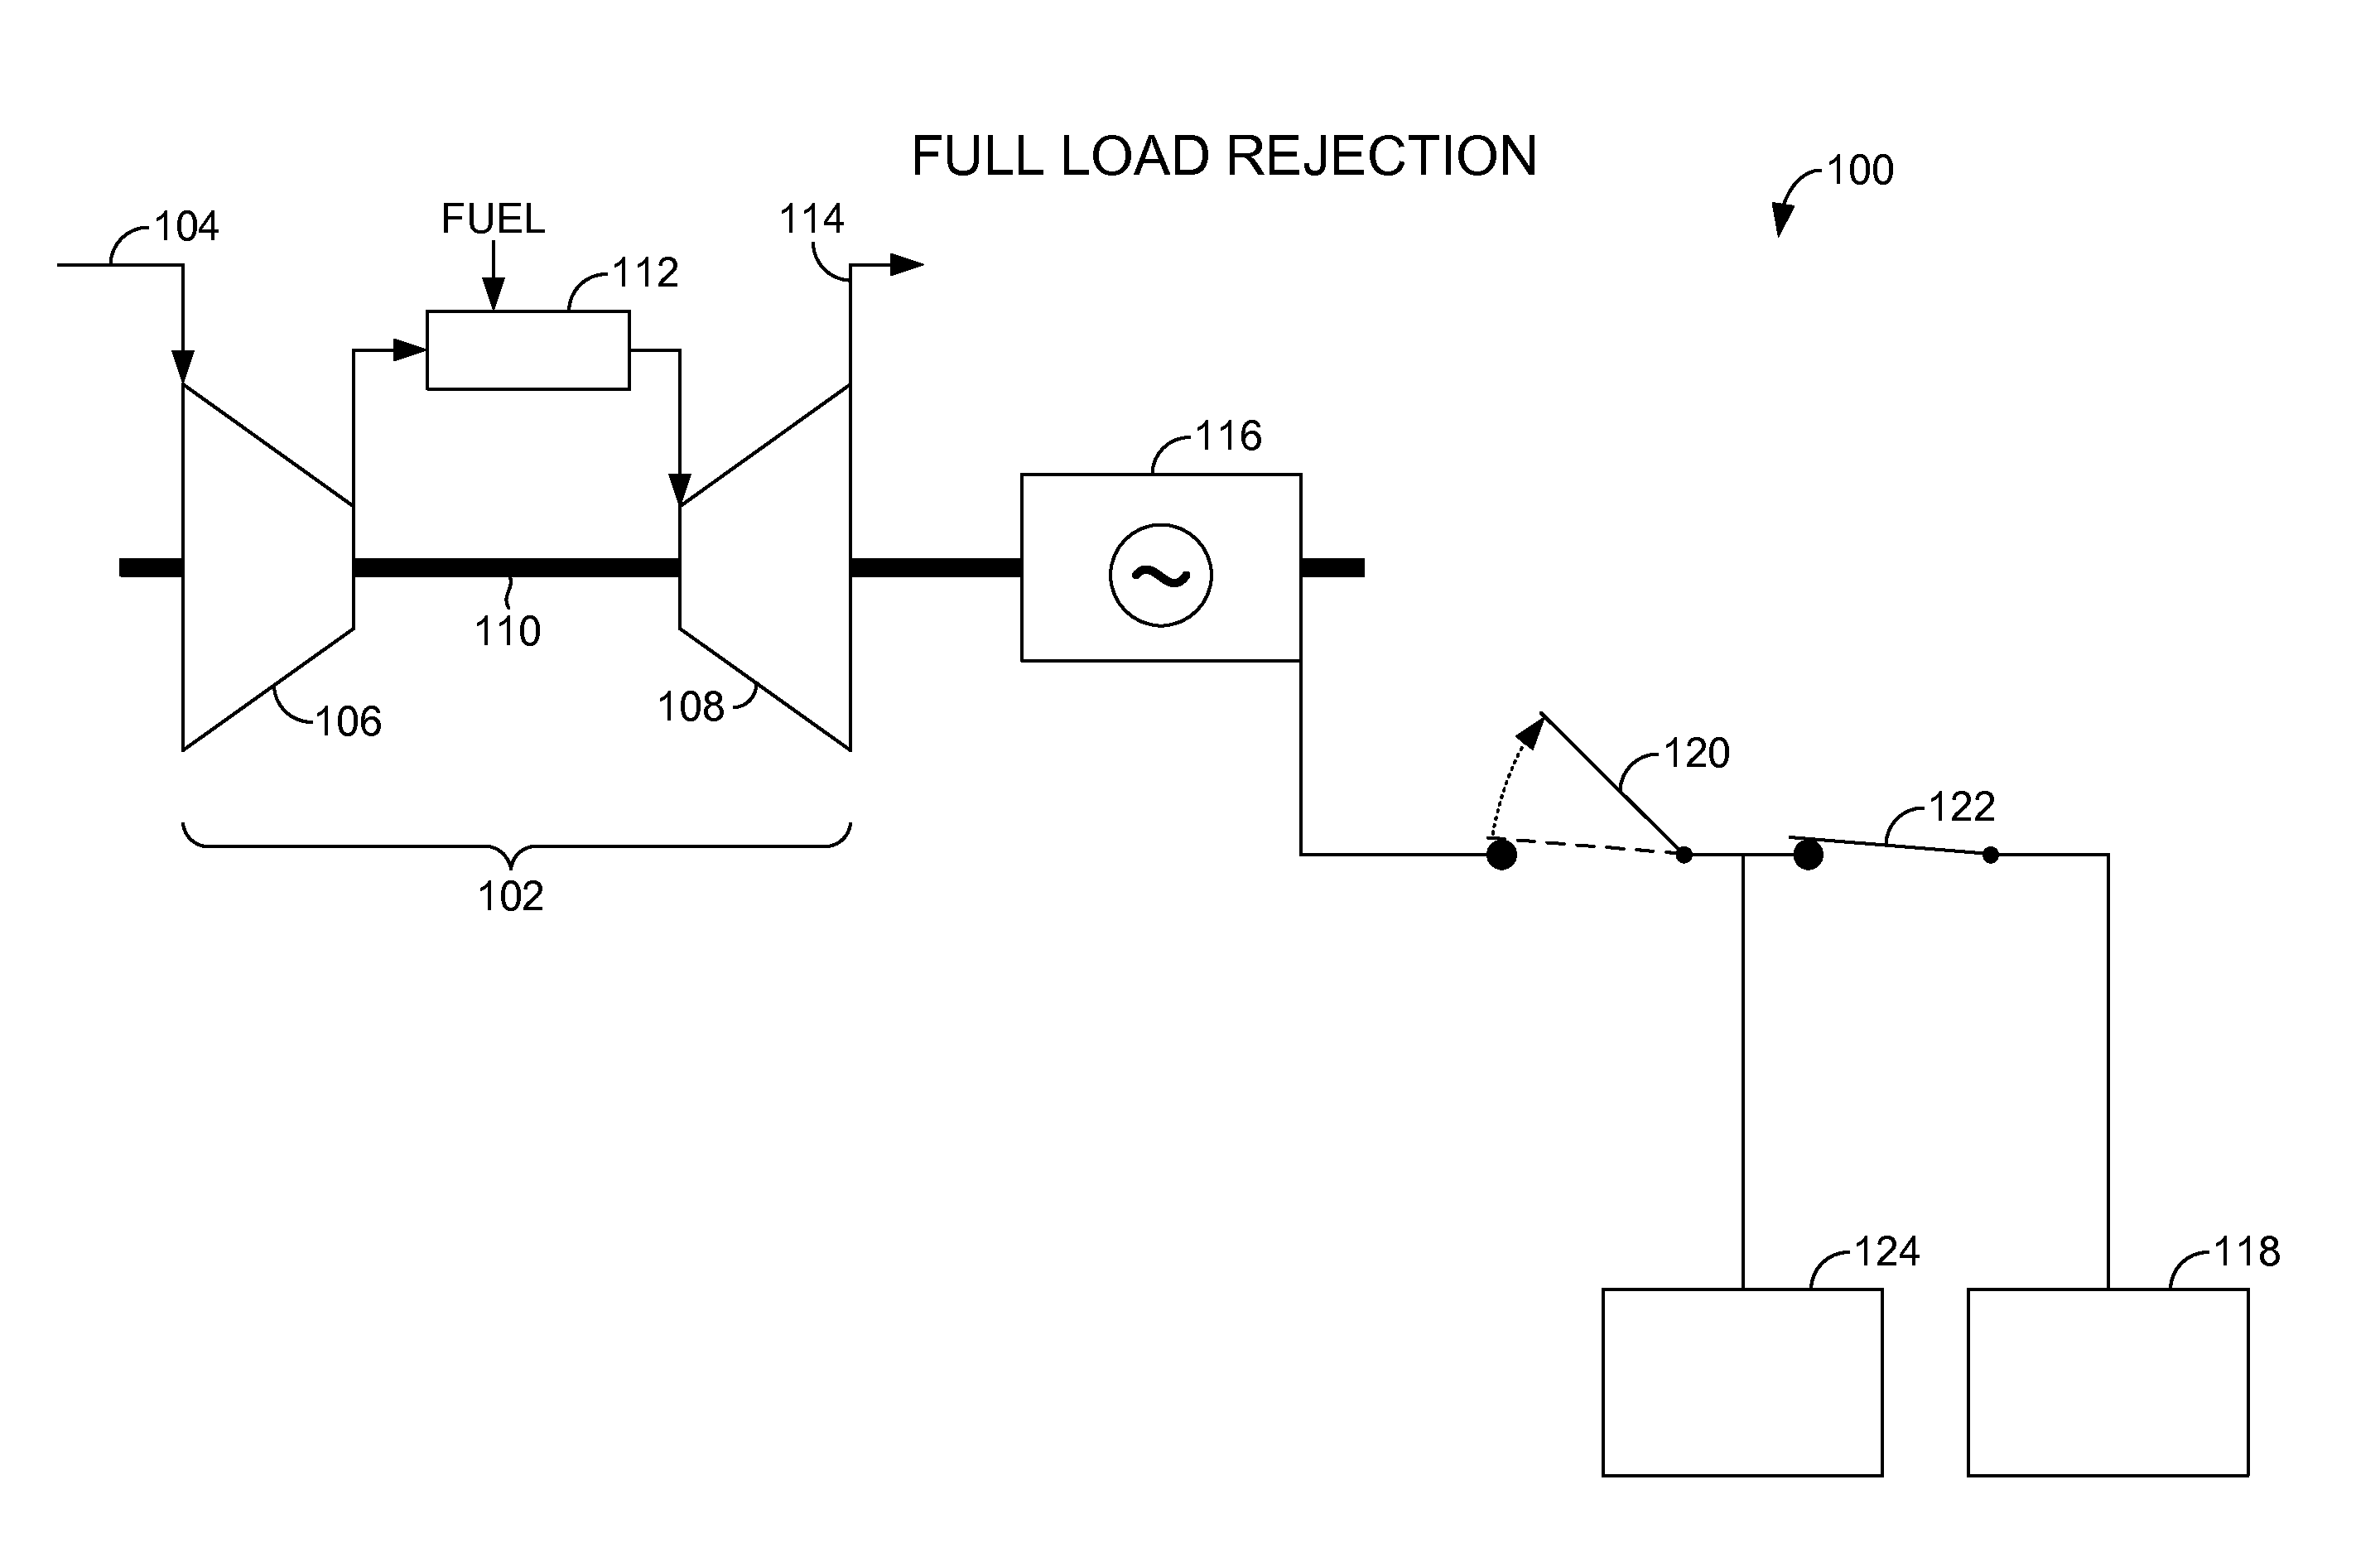 Load rejection and recovery using a secondary fuel nozzle